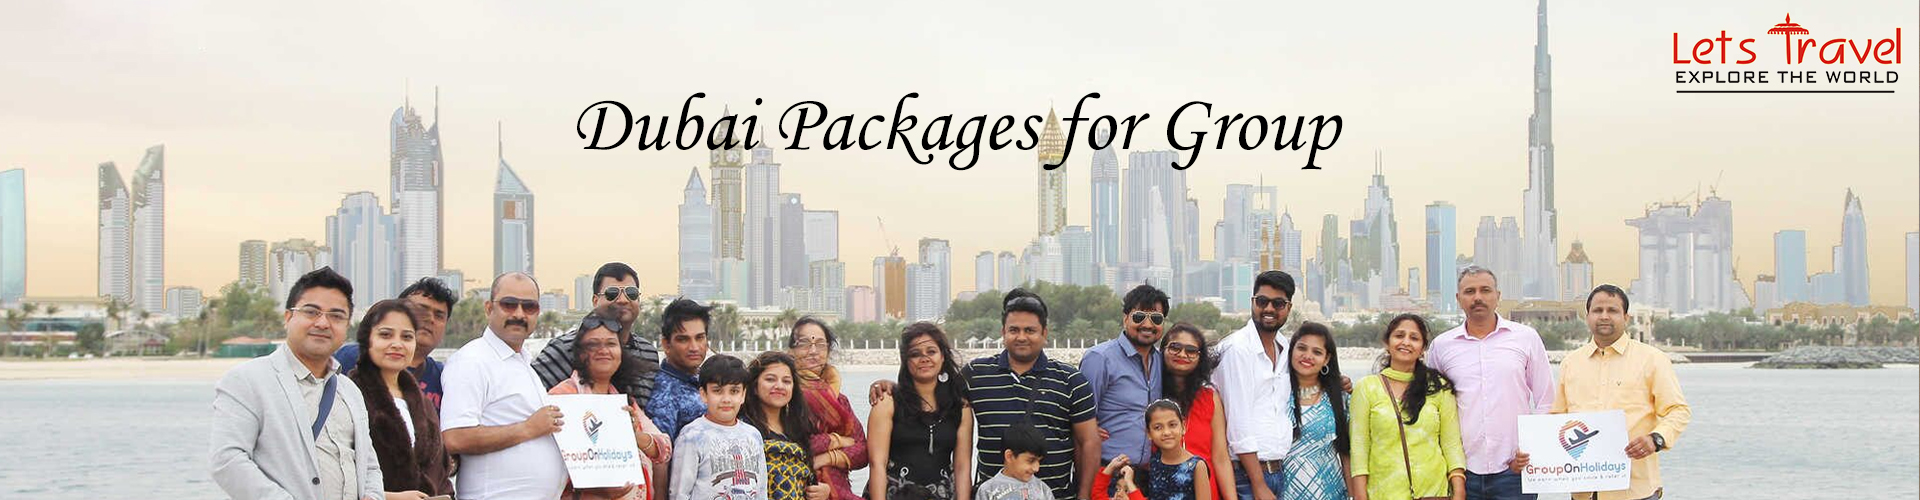 Dubai Packages for Group